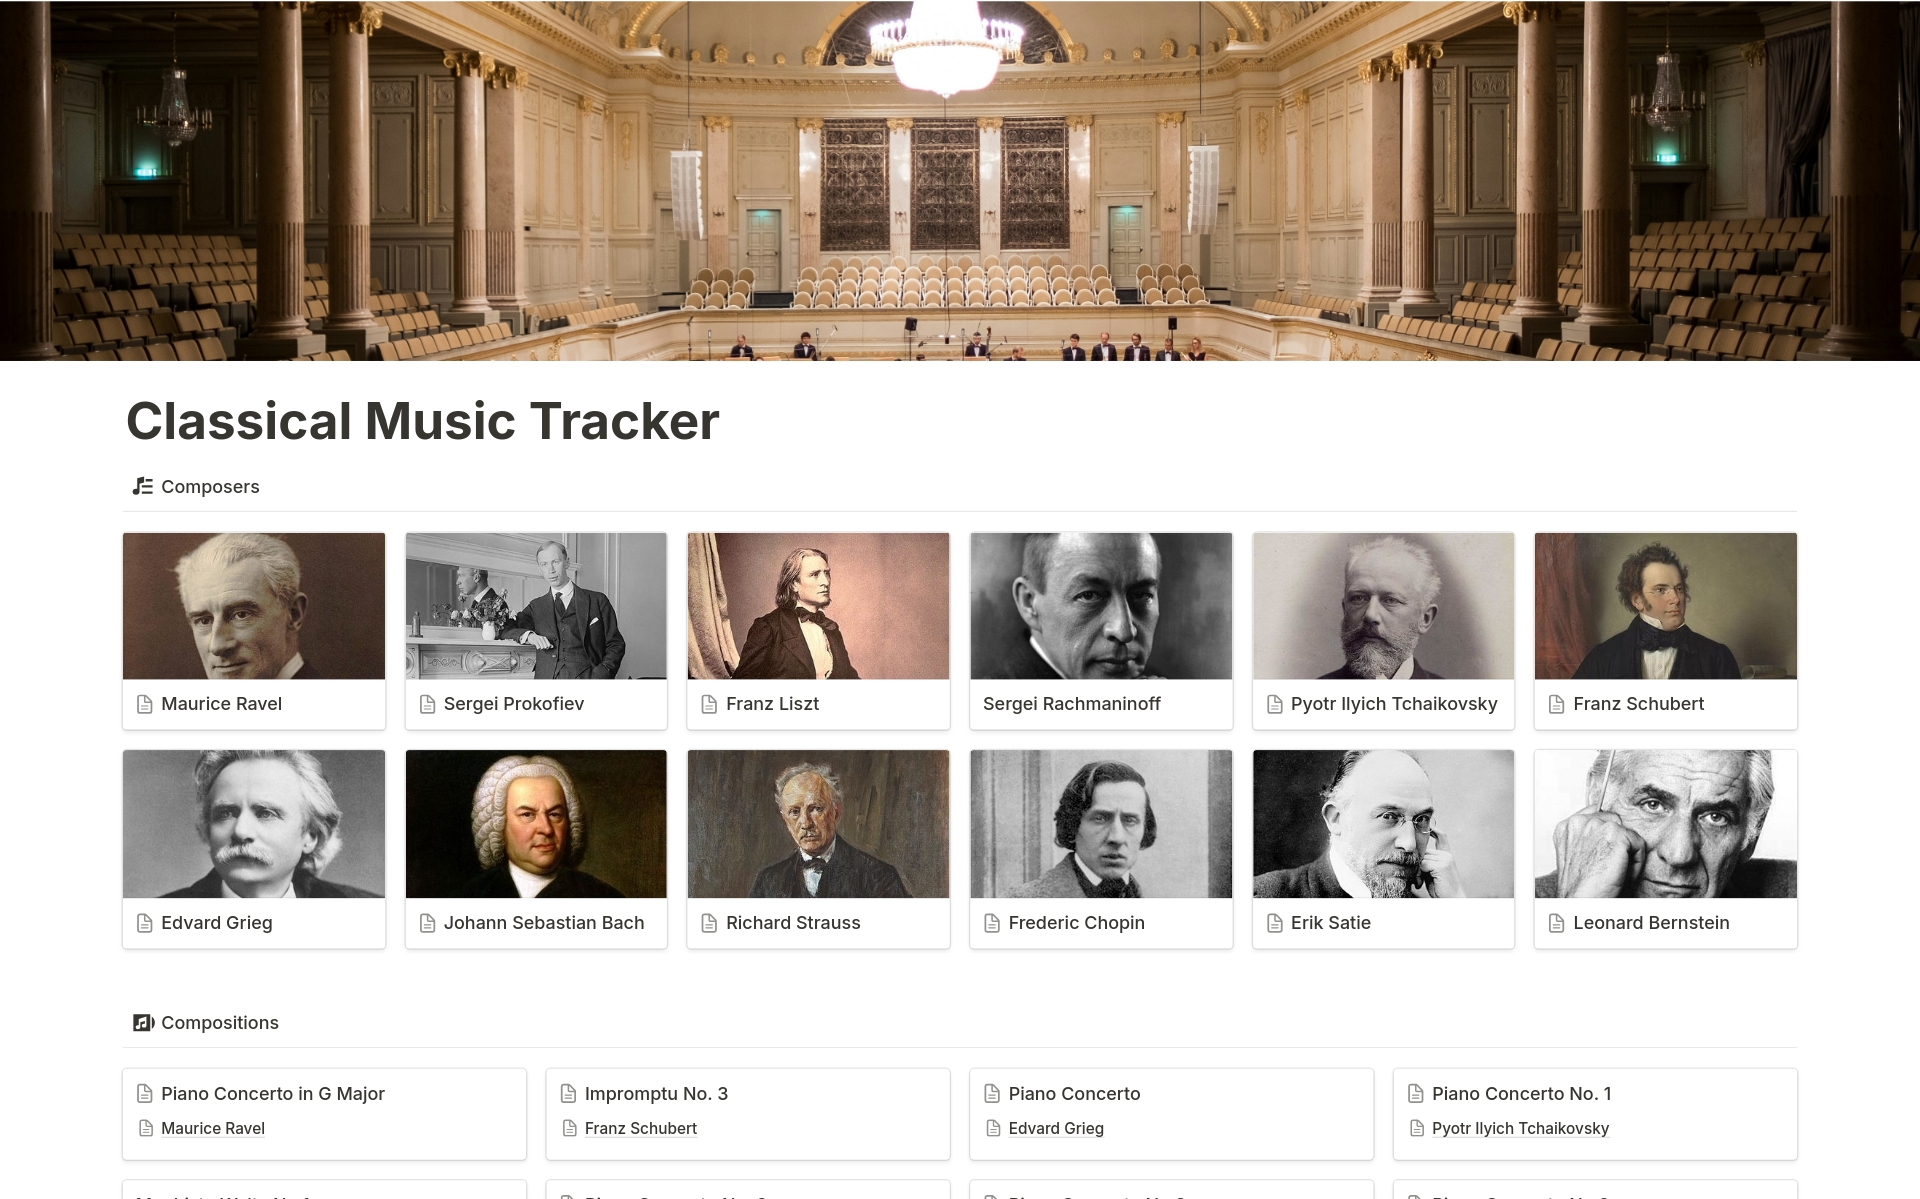 The Classical Music Tracker is a template where you can track the work of your favorite composers, the excitement of performances, and the talent of musicians in classical music.